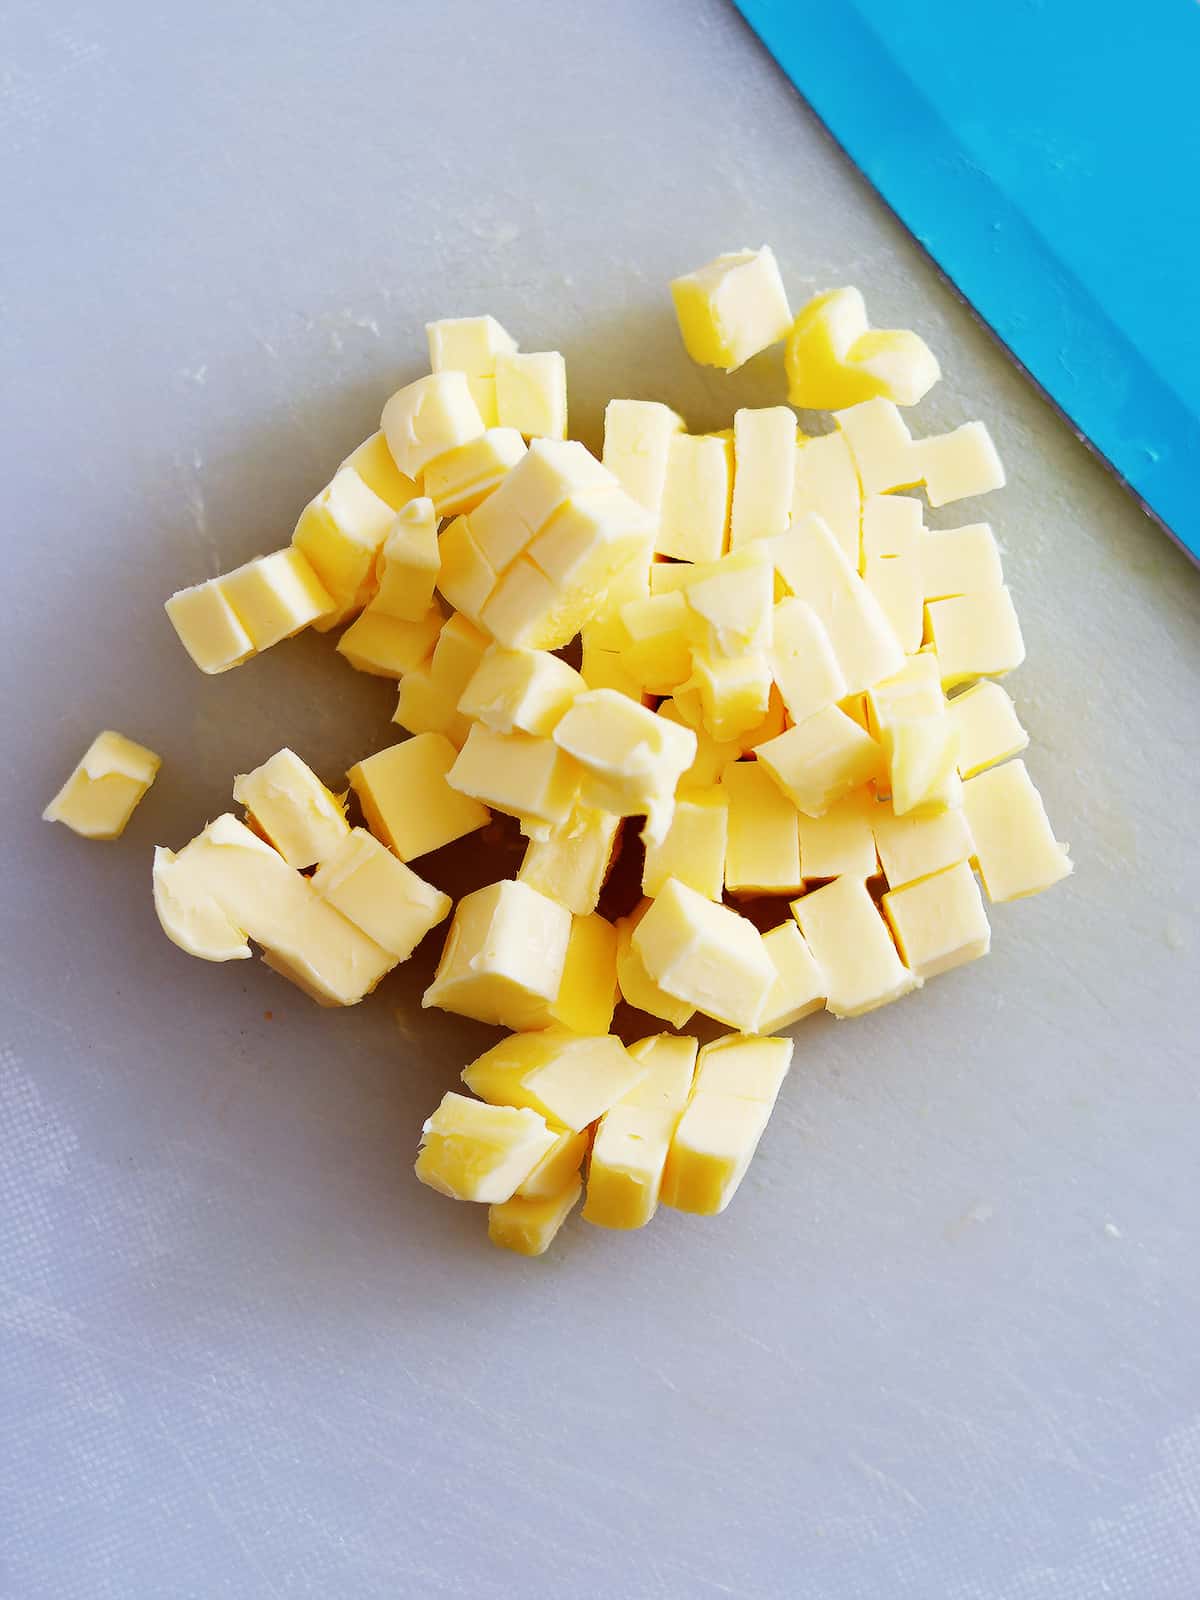 Small cubes of butter on a while silicone cutting board with a ceramic blue chef's knife.